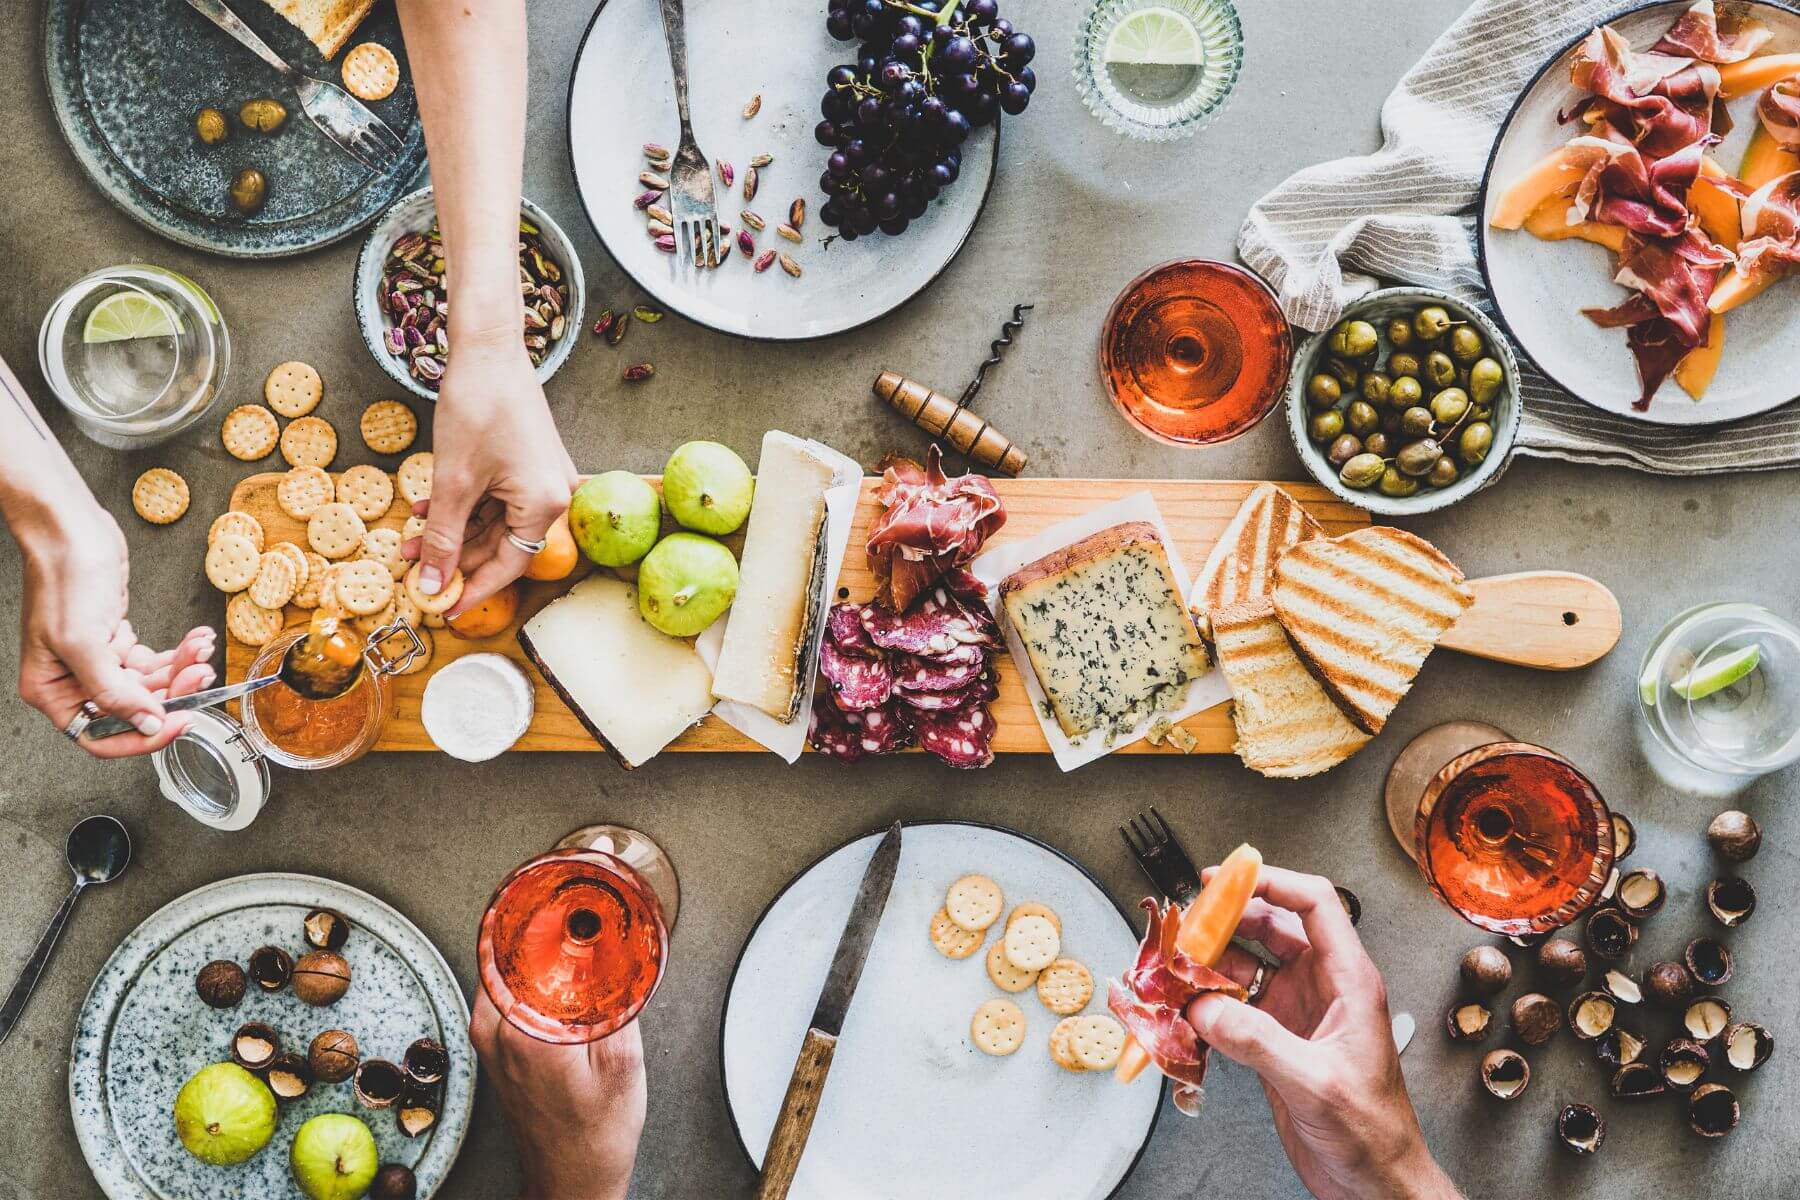 charcuterie board with friends passing around plates together